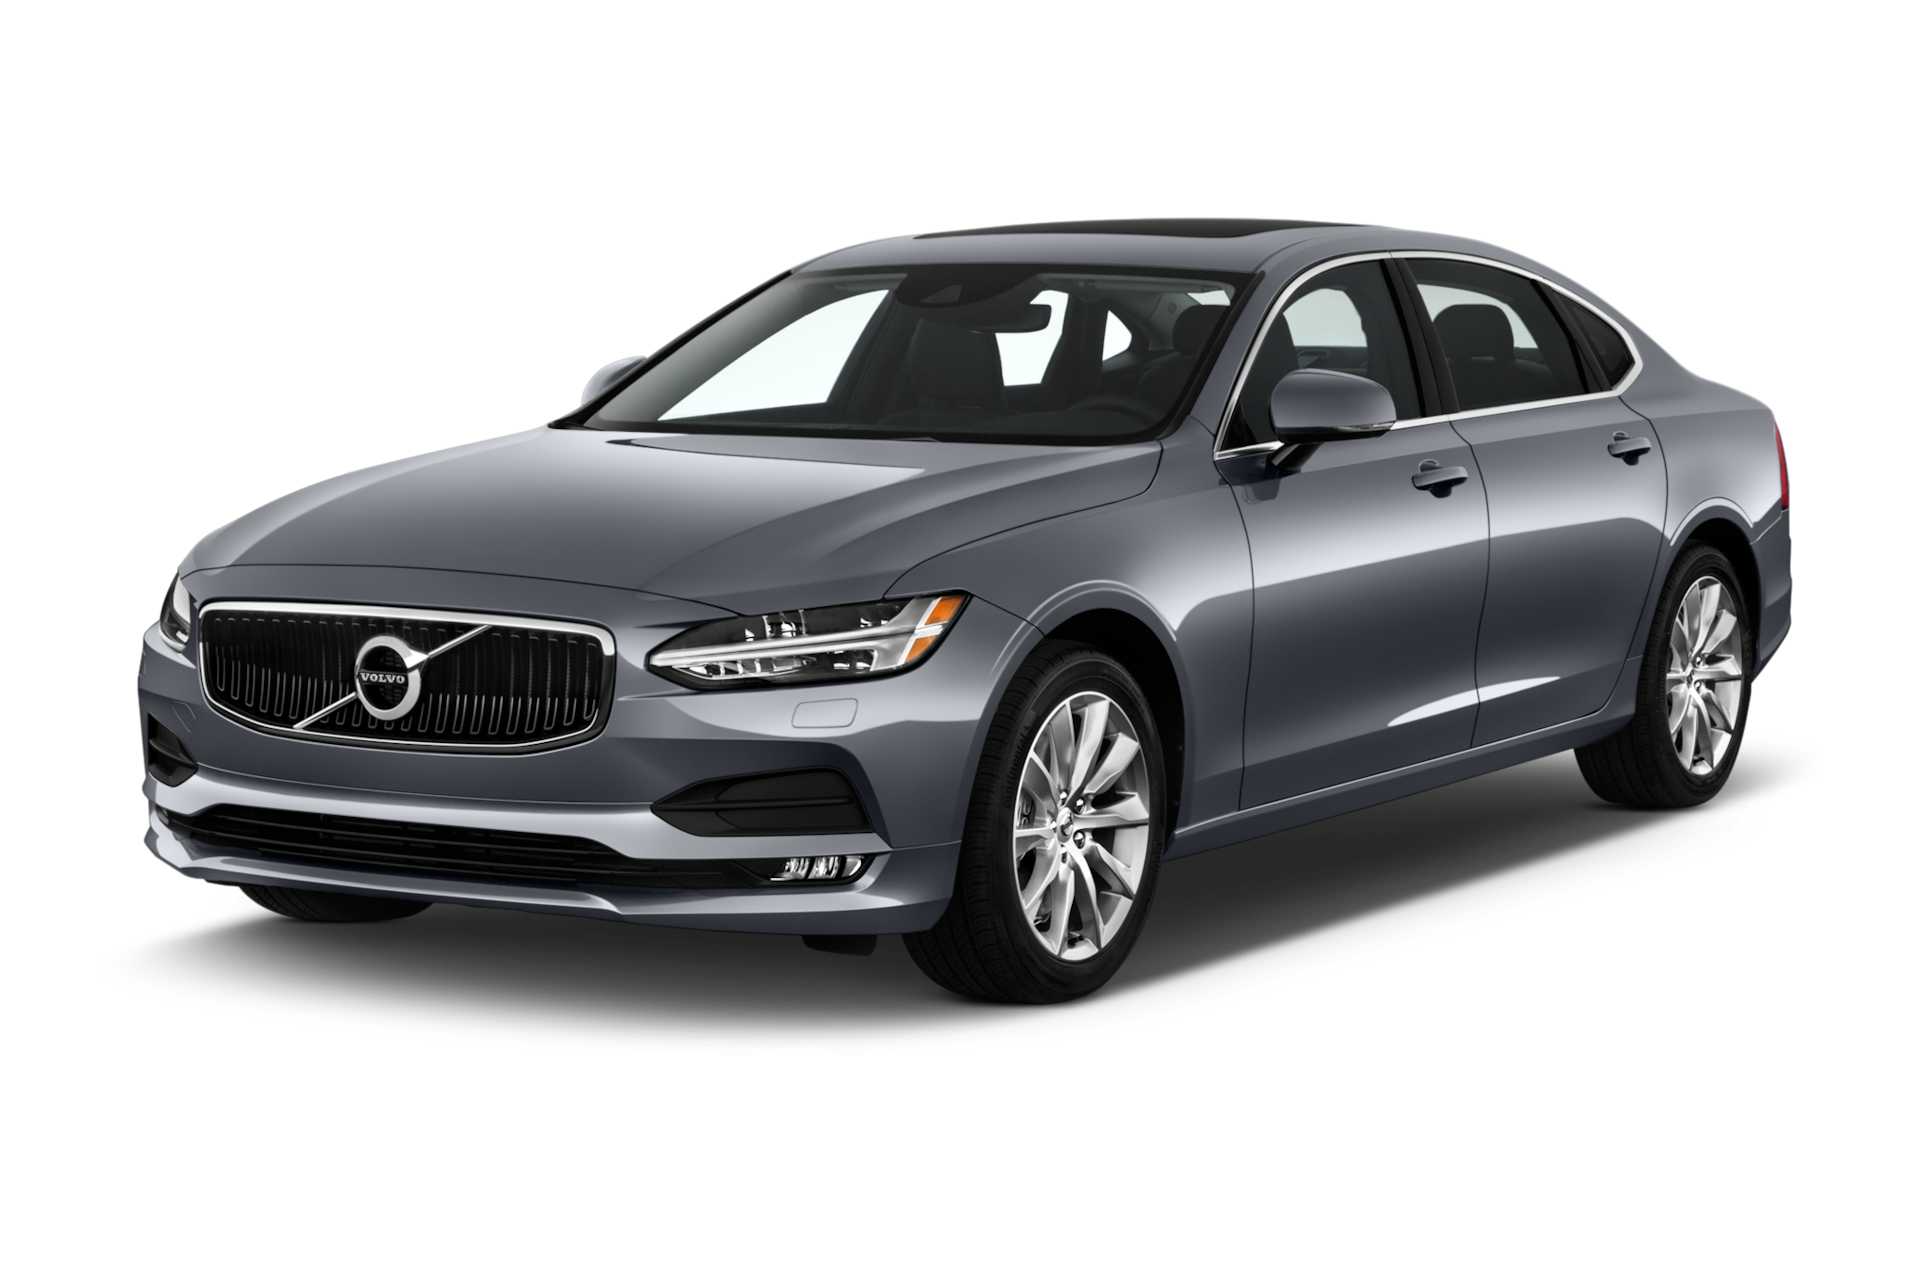 2018 Volvo S90 Prices, Reviews, and Photos - MotorTrend